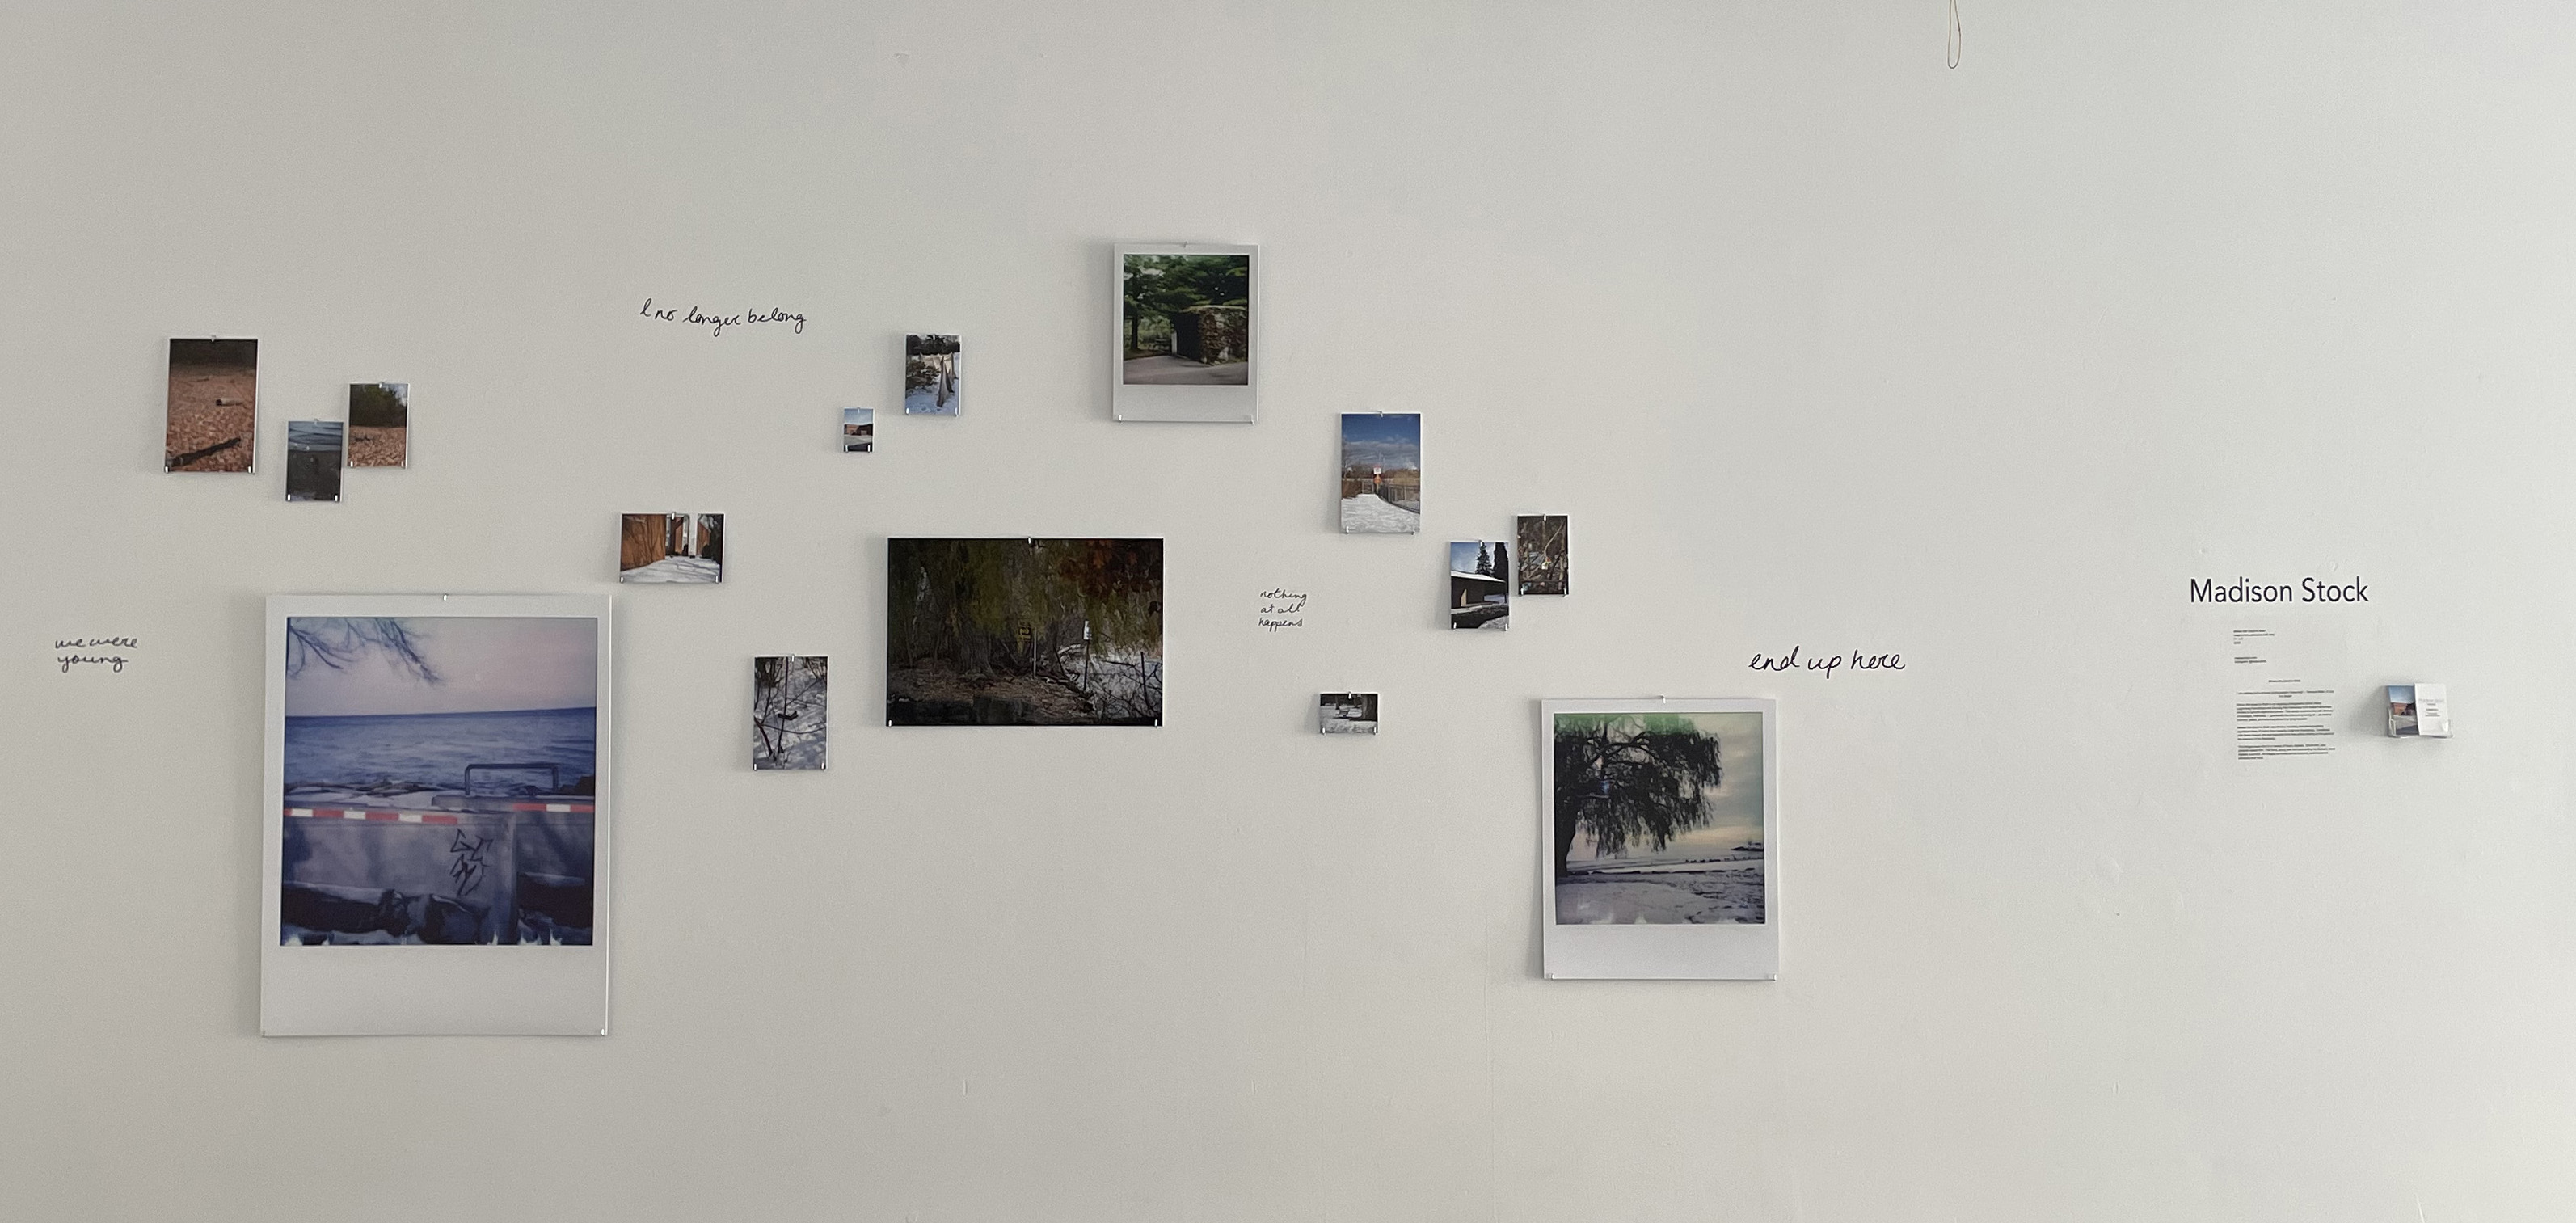 Where We Used to Walk - Installation